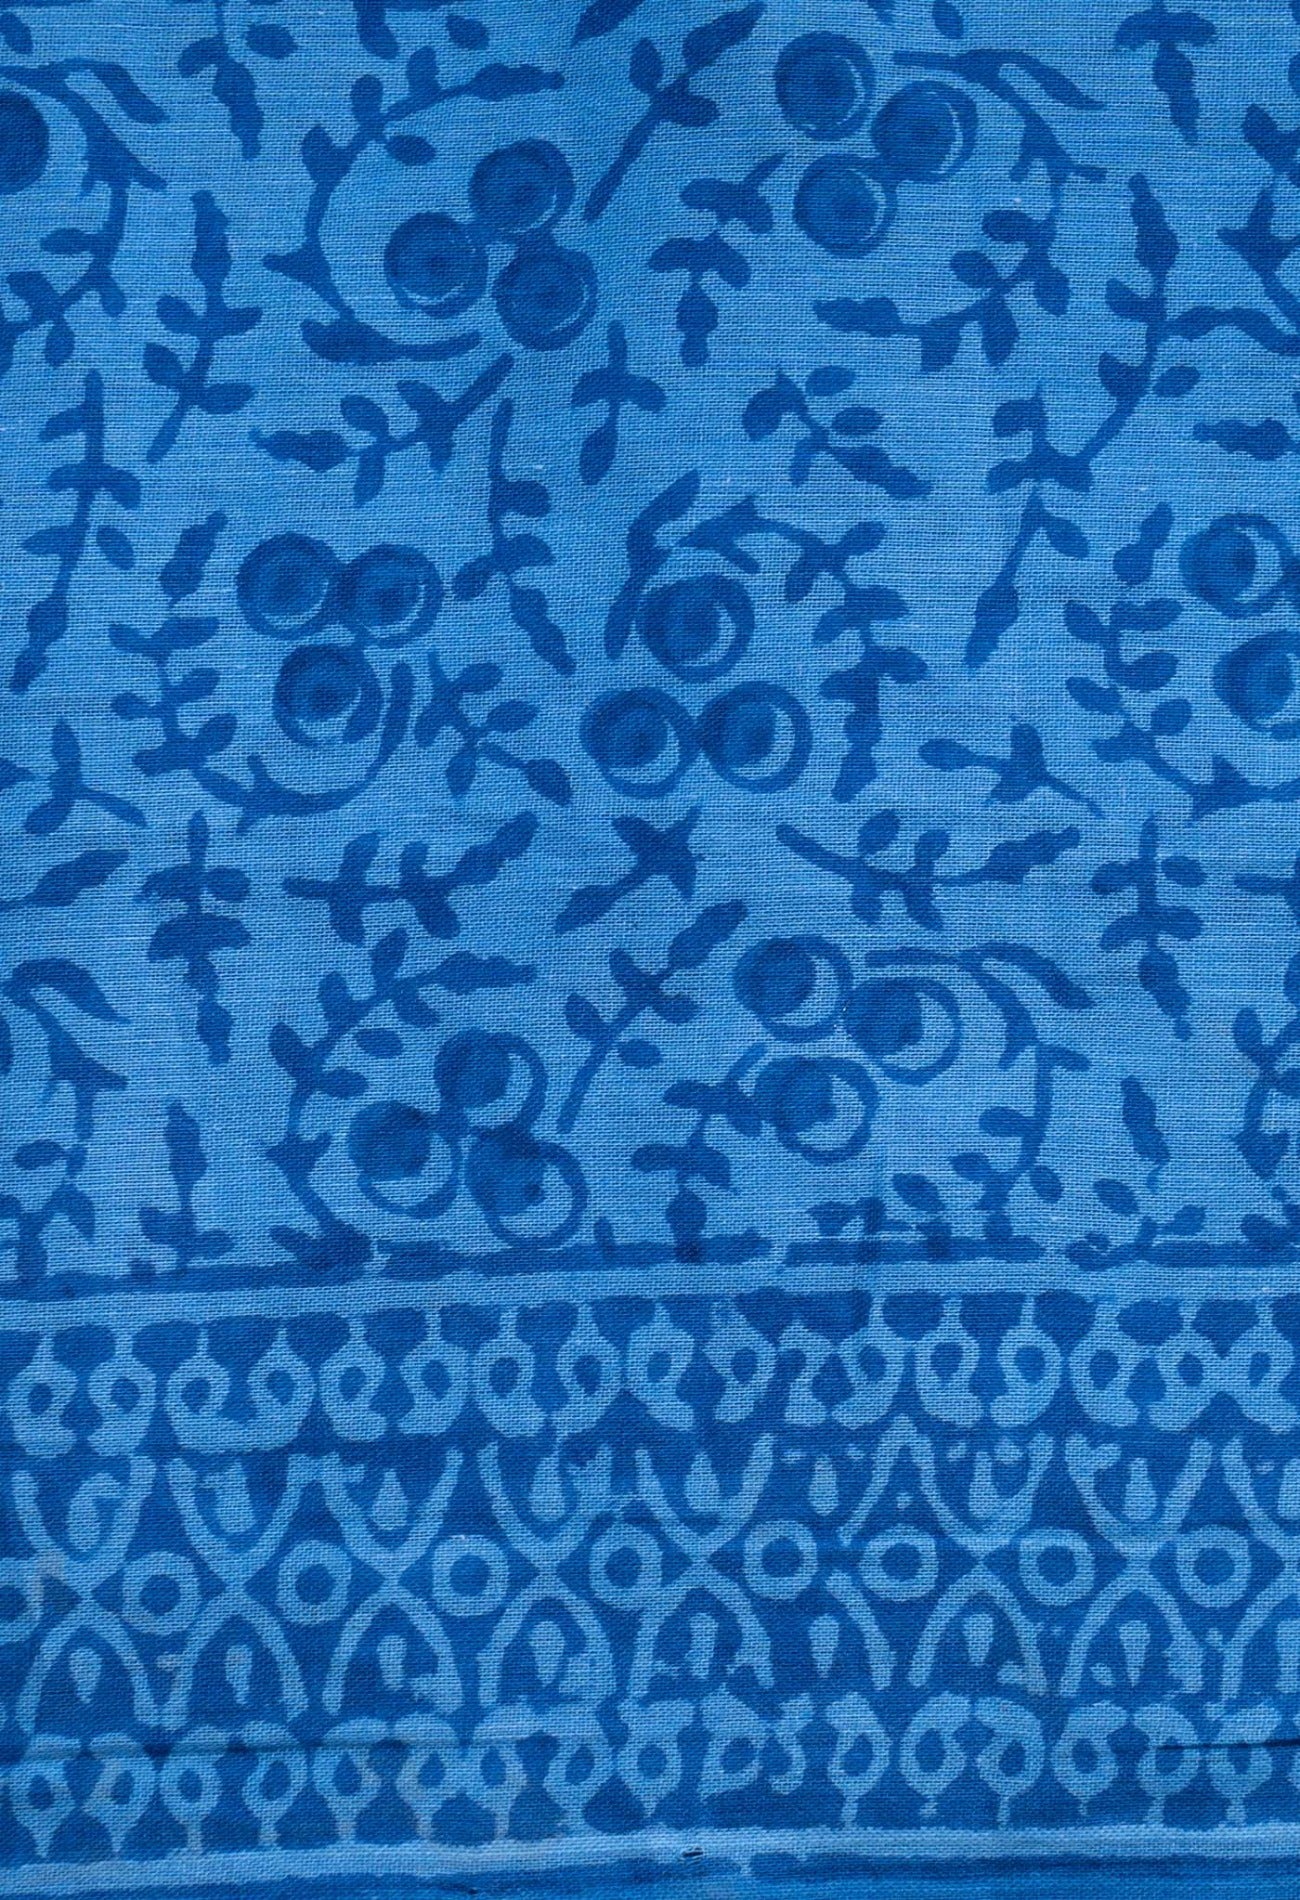 Online Shopping for Blue Pure Block Printed Mulmul Cotton Saree with Hand Block Prints from Rajasthan at Unnatisilks.com India
